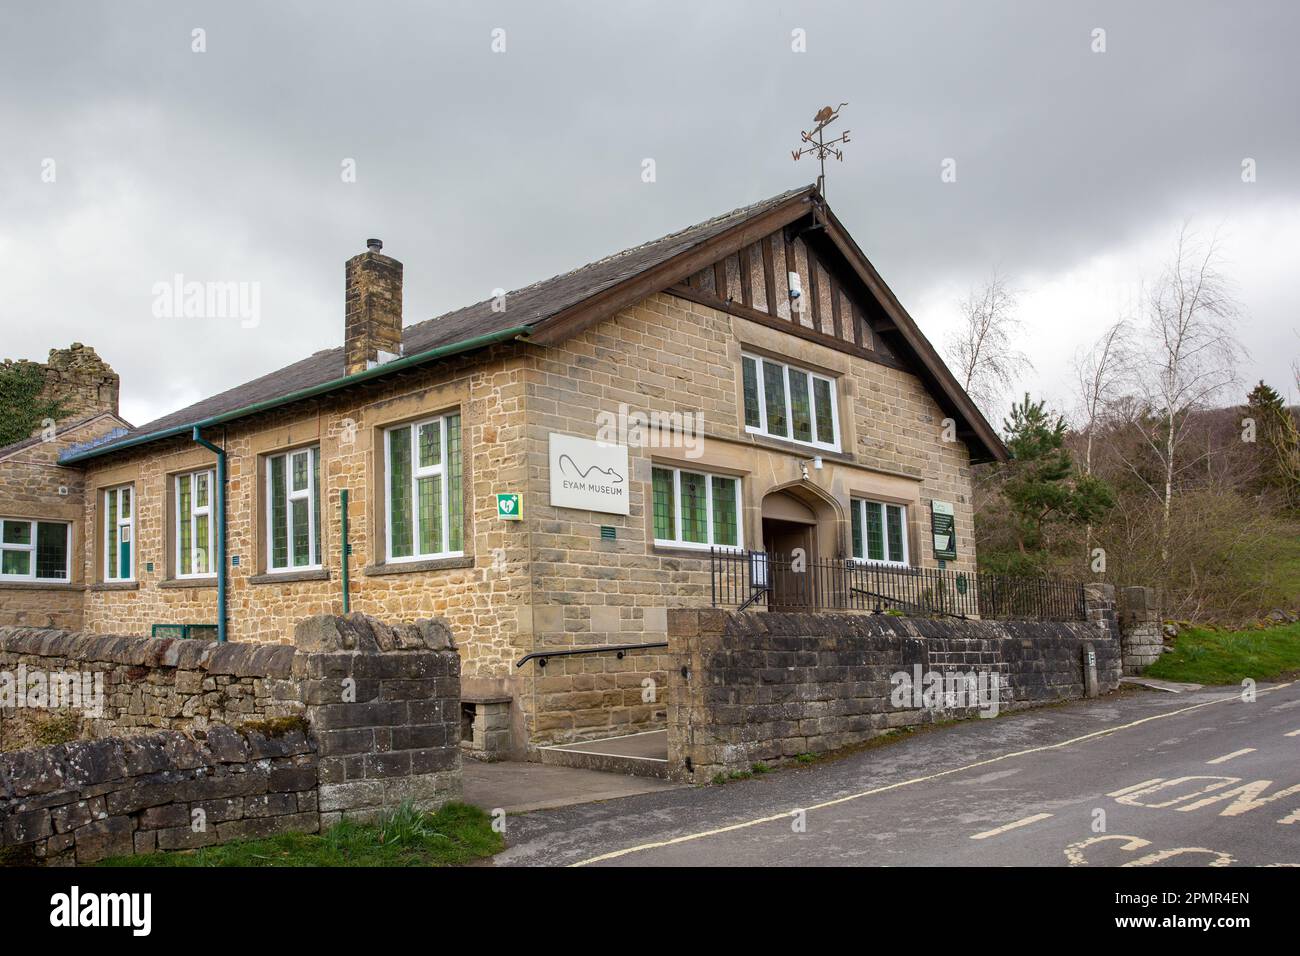 The plague museum in the Derbyshire Peak District  plague village of Eyam England Stock Photo